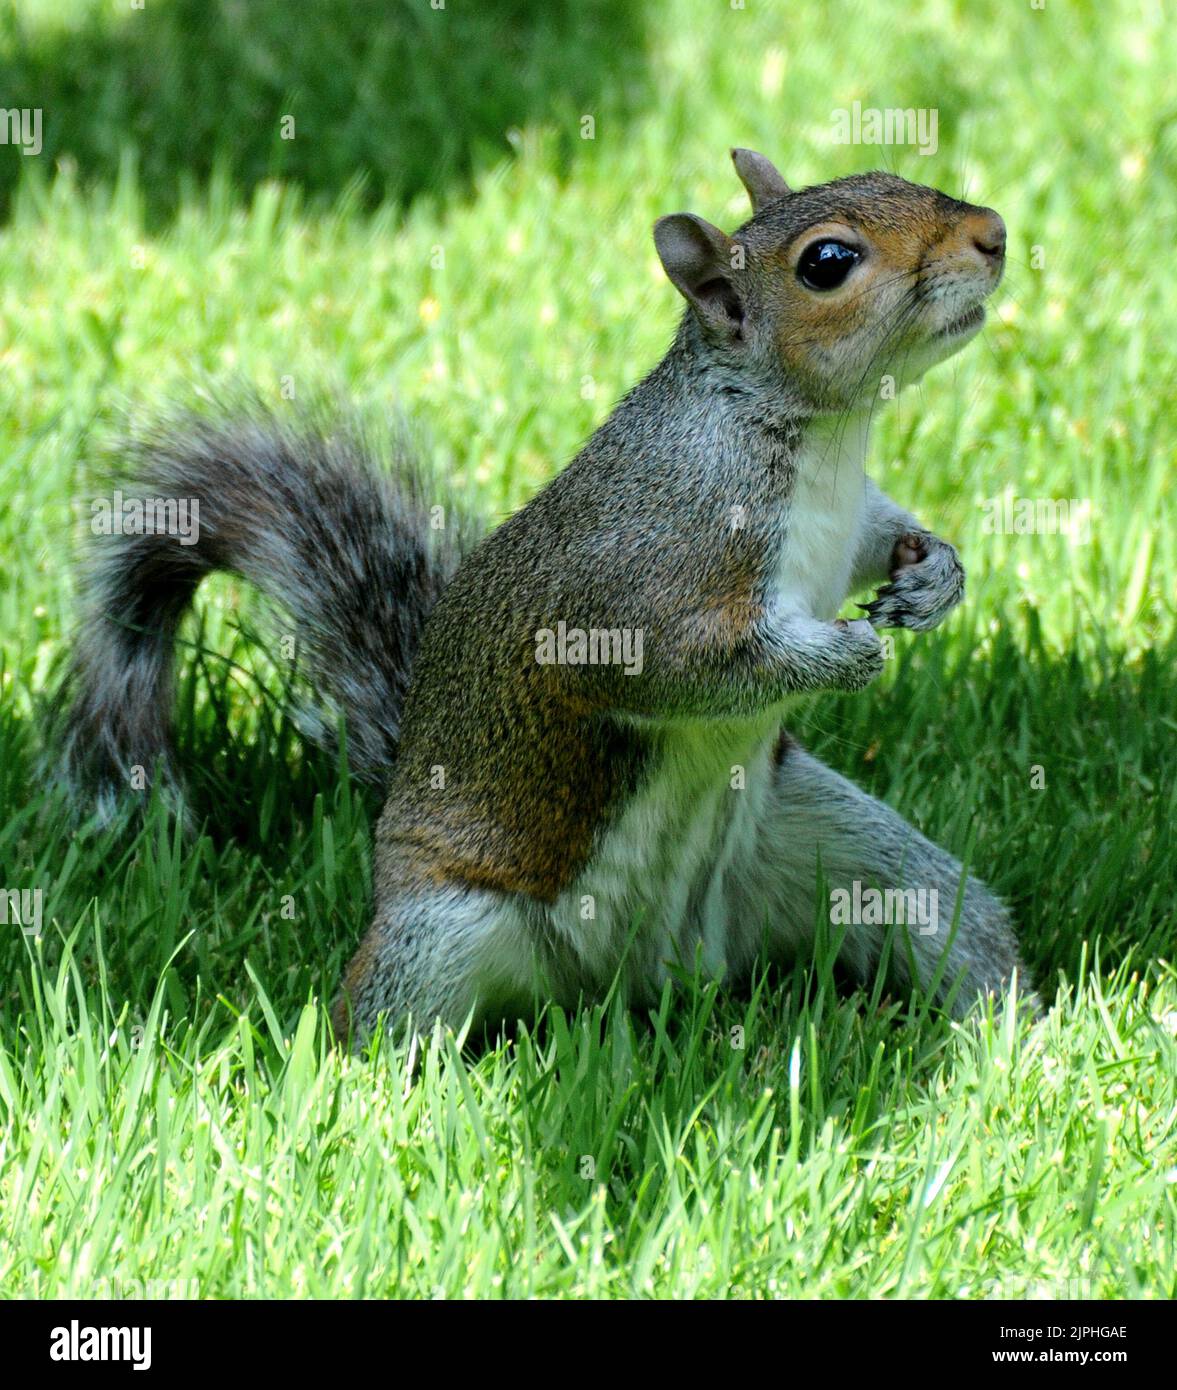 GREY SQUIRREL, PORTCHESTER MIKE WALKER PICTURES, 2011 Stock Photo